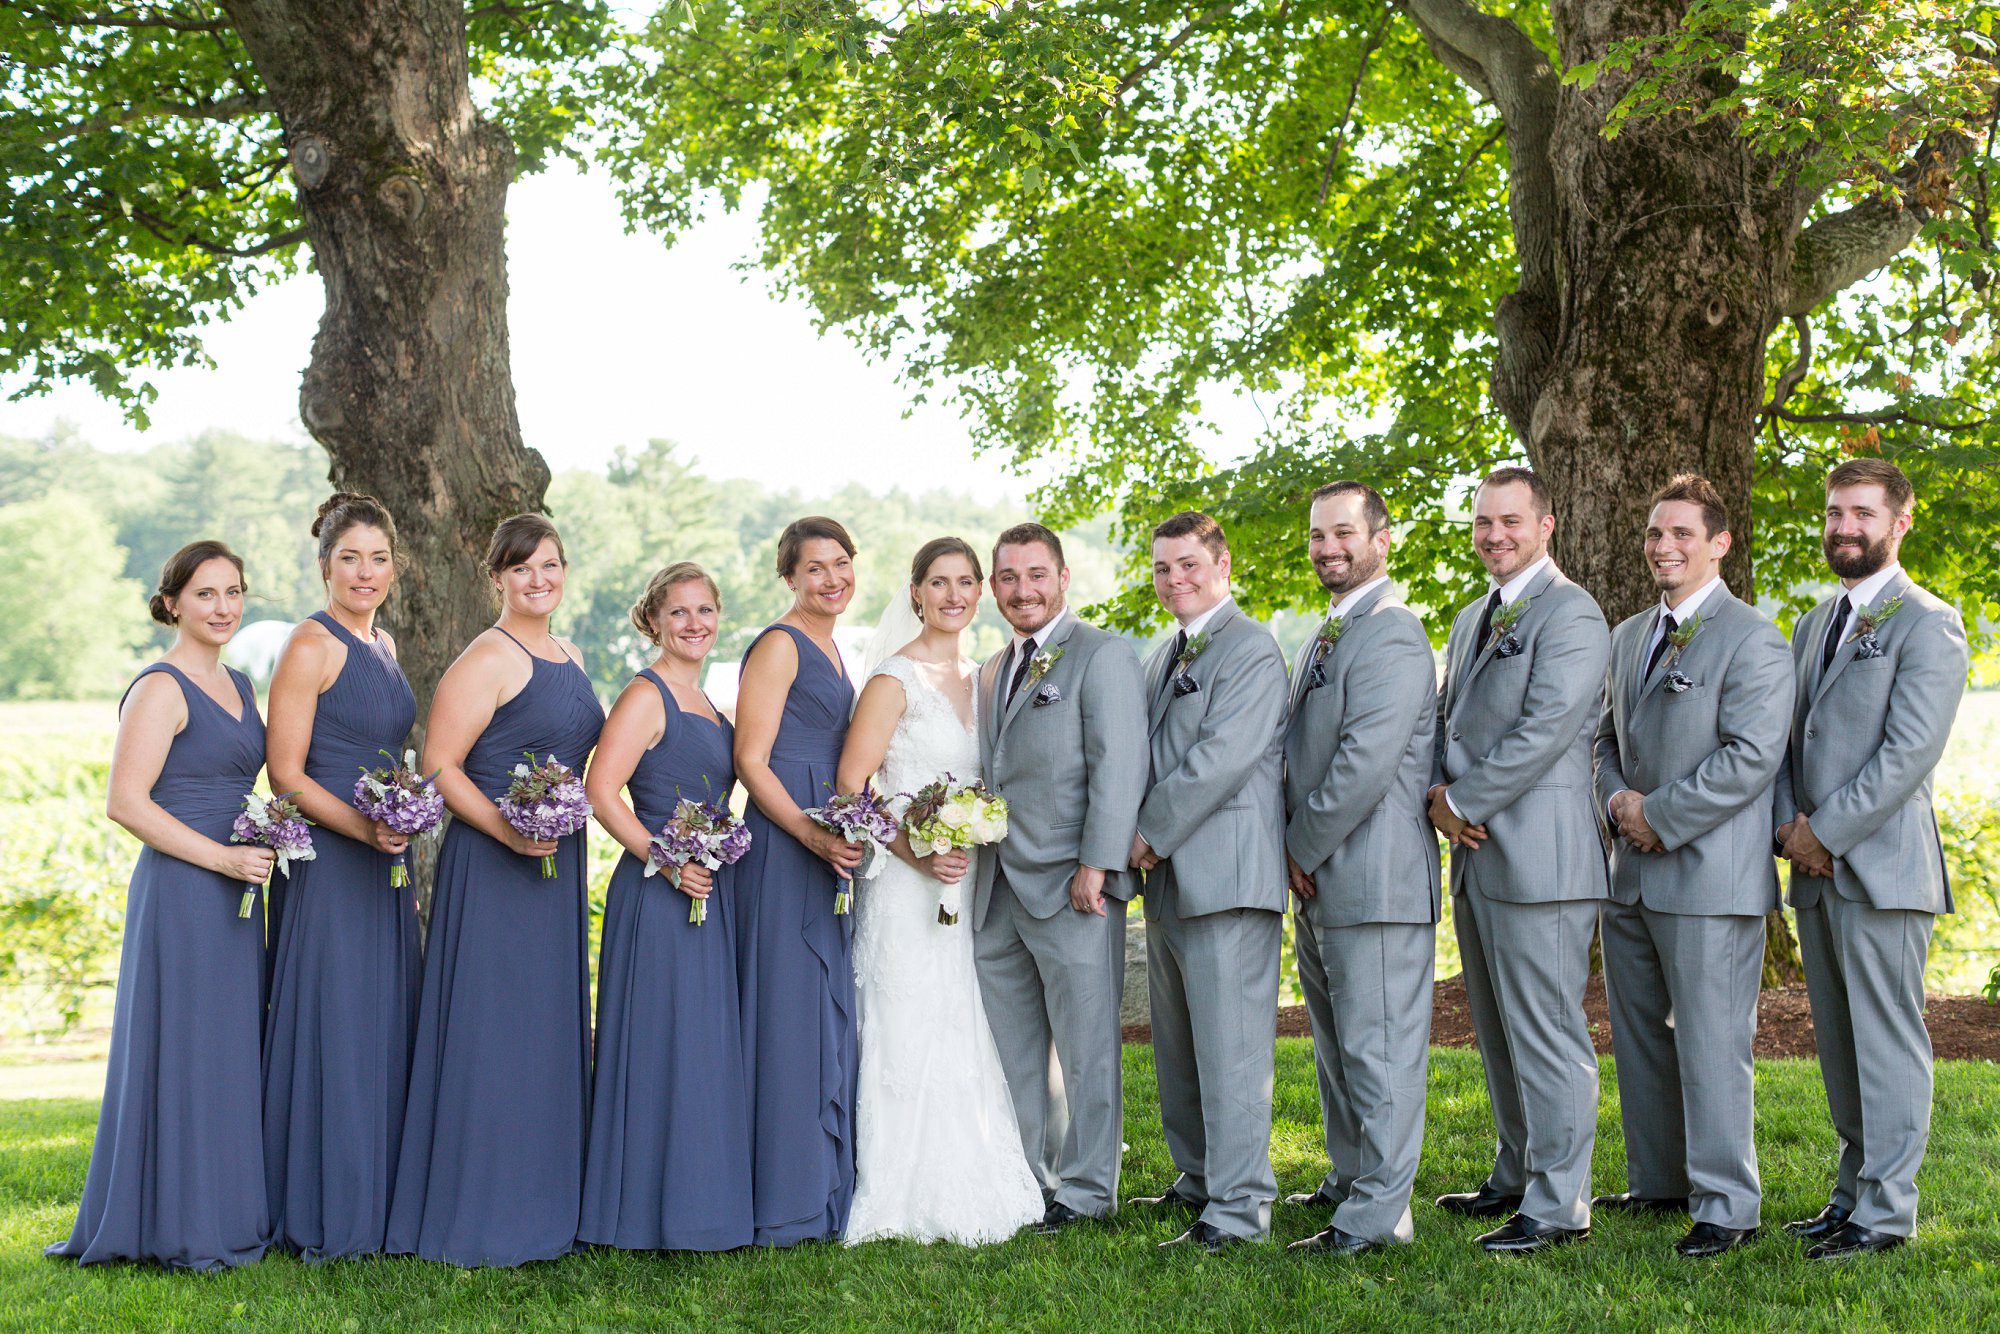 Bridal party portraits at Flag Hill Winery, Lee NH | New Hampshire Wedding Photographer